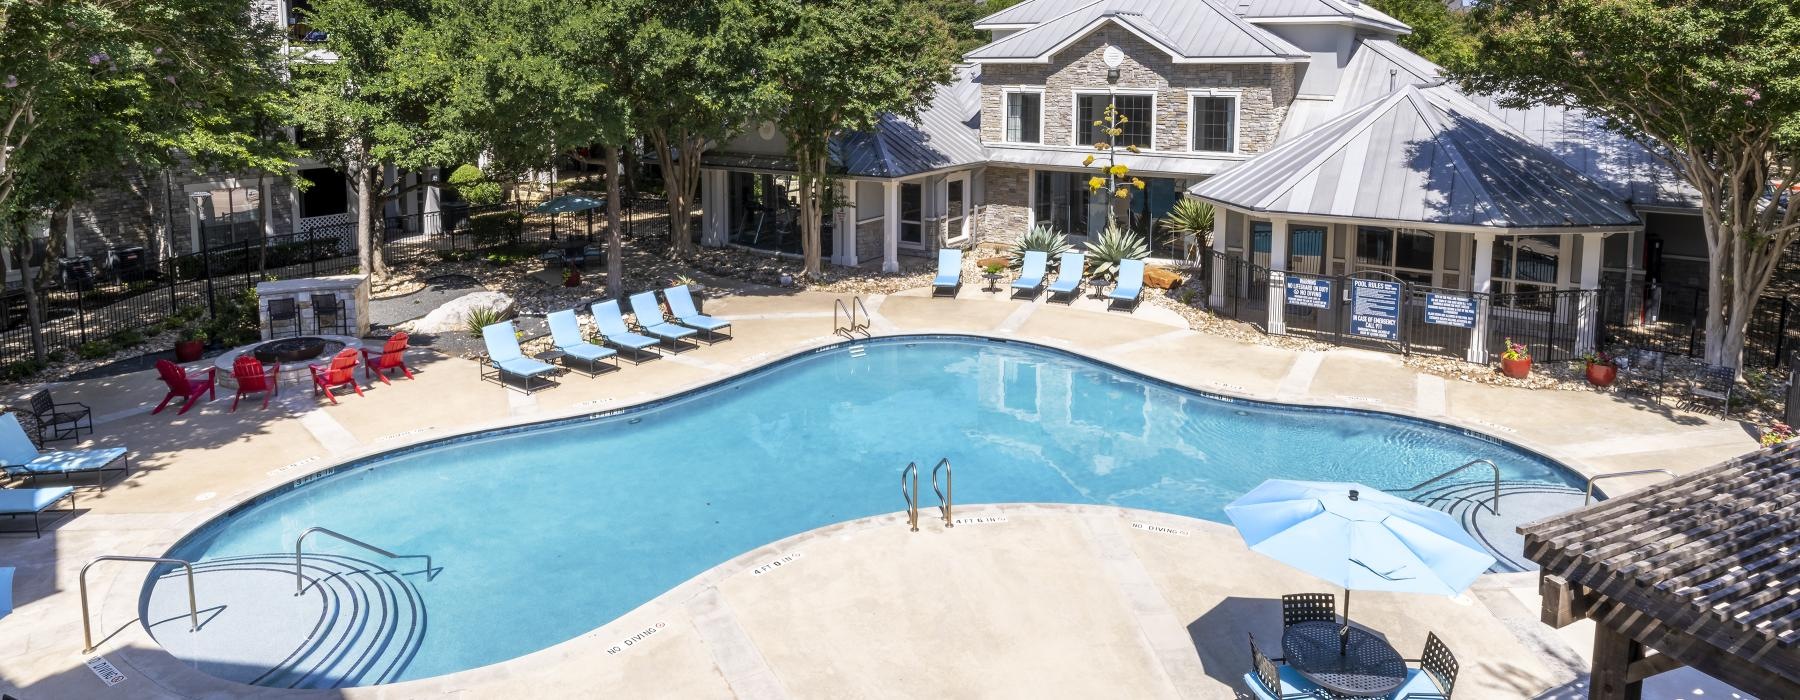 a swimming pool with chairs and umbrellas next to a house